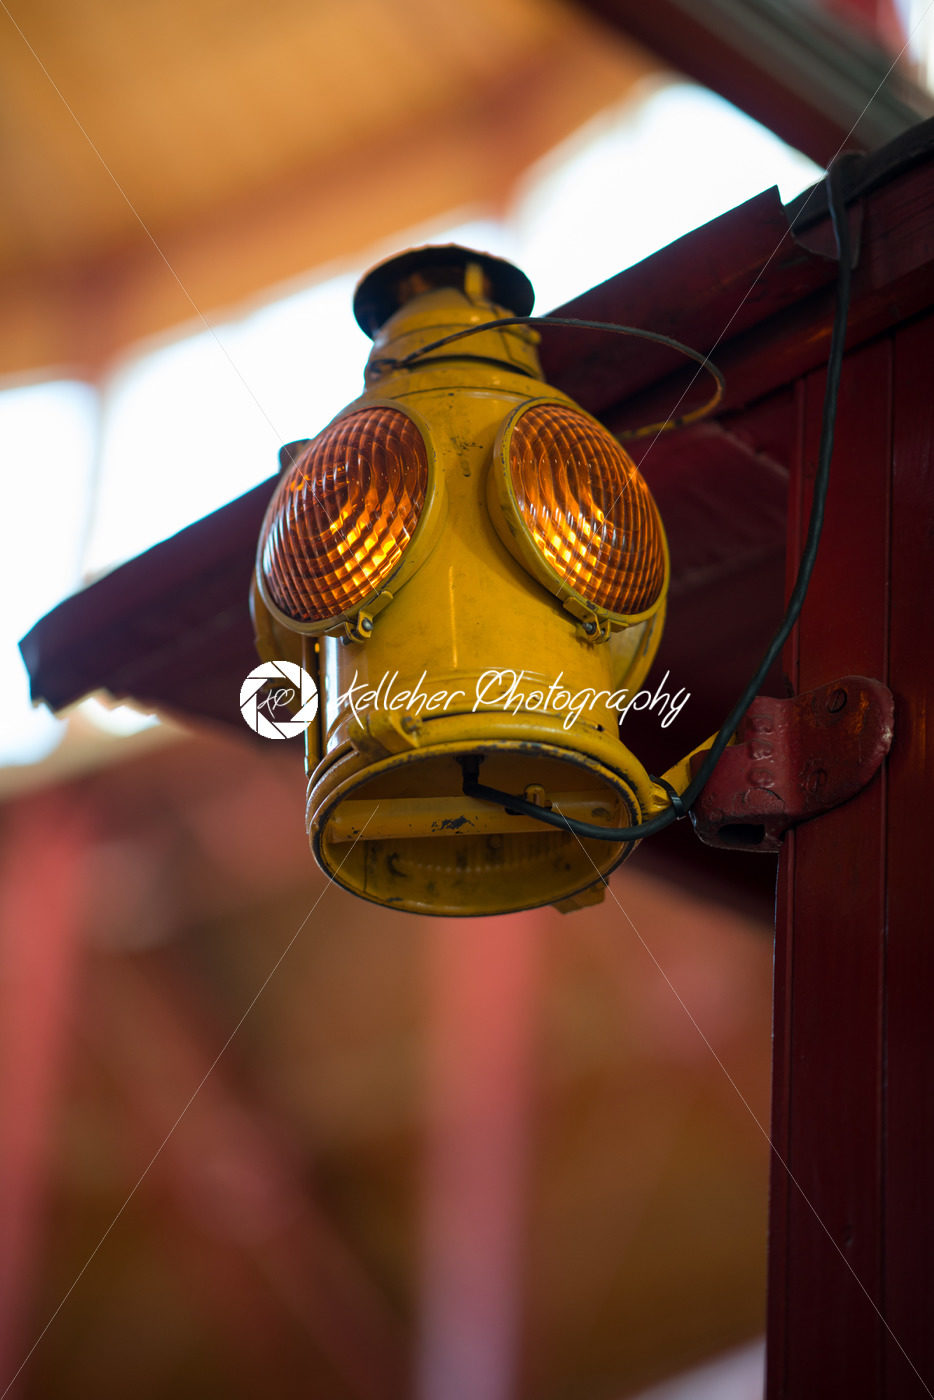 BALITMORE, MD – APRIL 15: Old Fashion Signal Lamp hanging off of Caboose on April 15, 2017 - Kelleher Photography Store